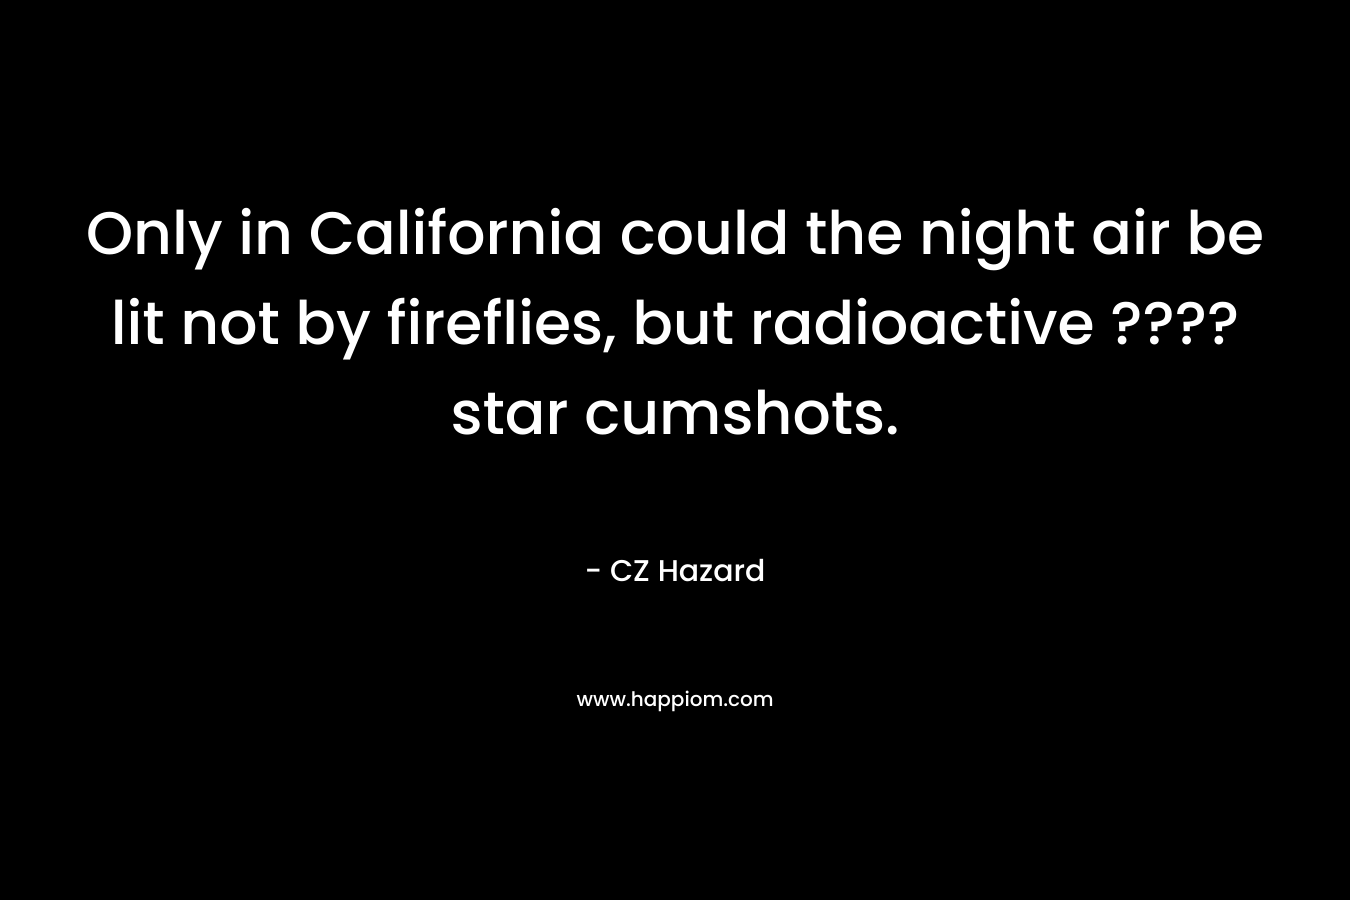 Only in California could the night air be lit not by fireflies, but radioactive ???? star cumshots. – CZ Hazard